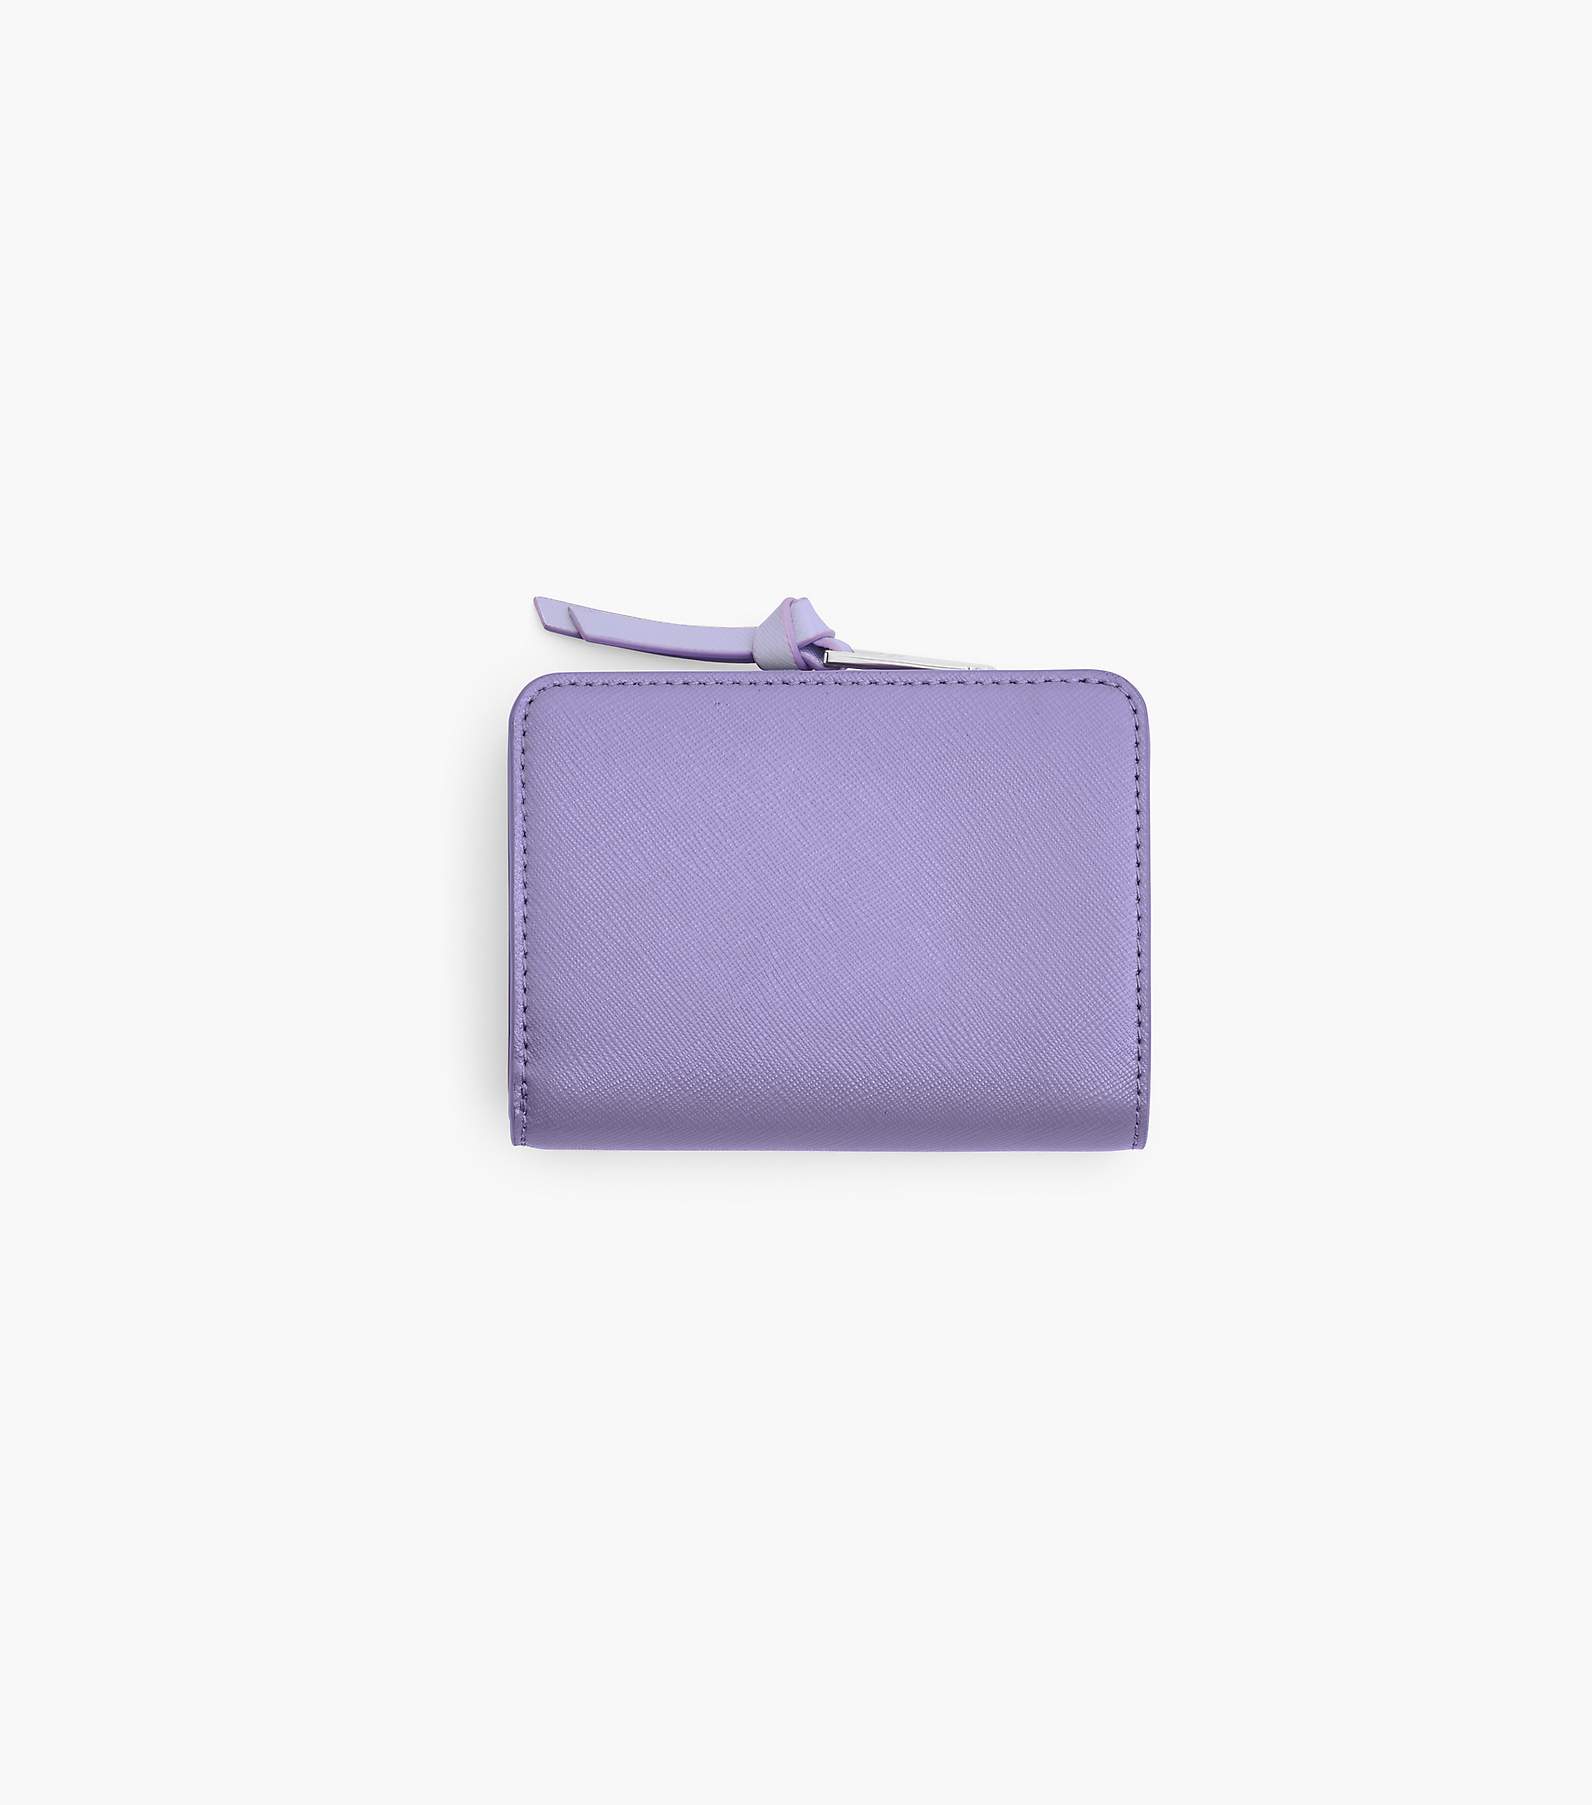 Marc Jacobs 'The Utility Snapshot Mini Compact Wallet